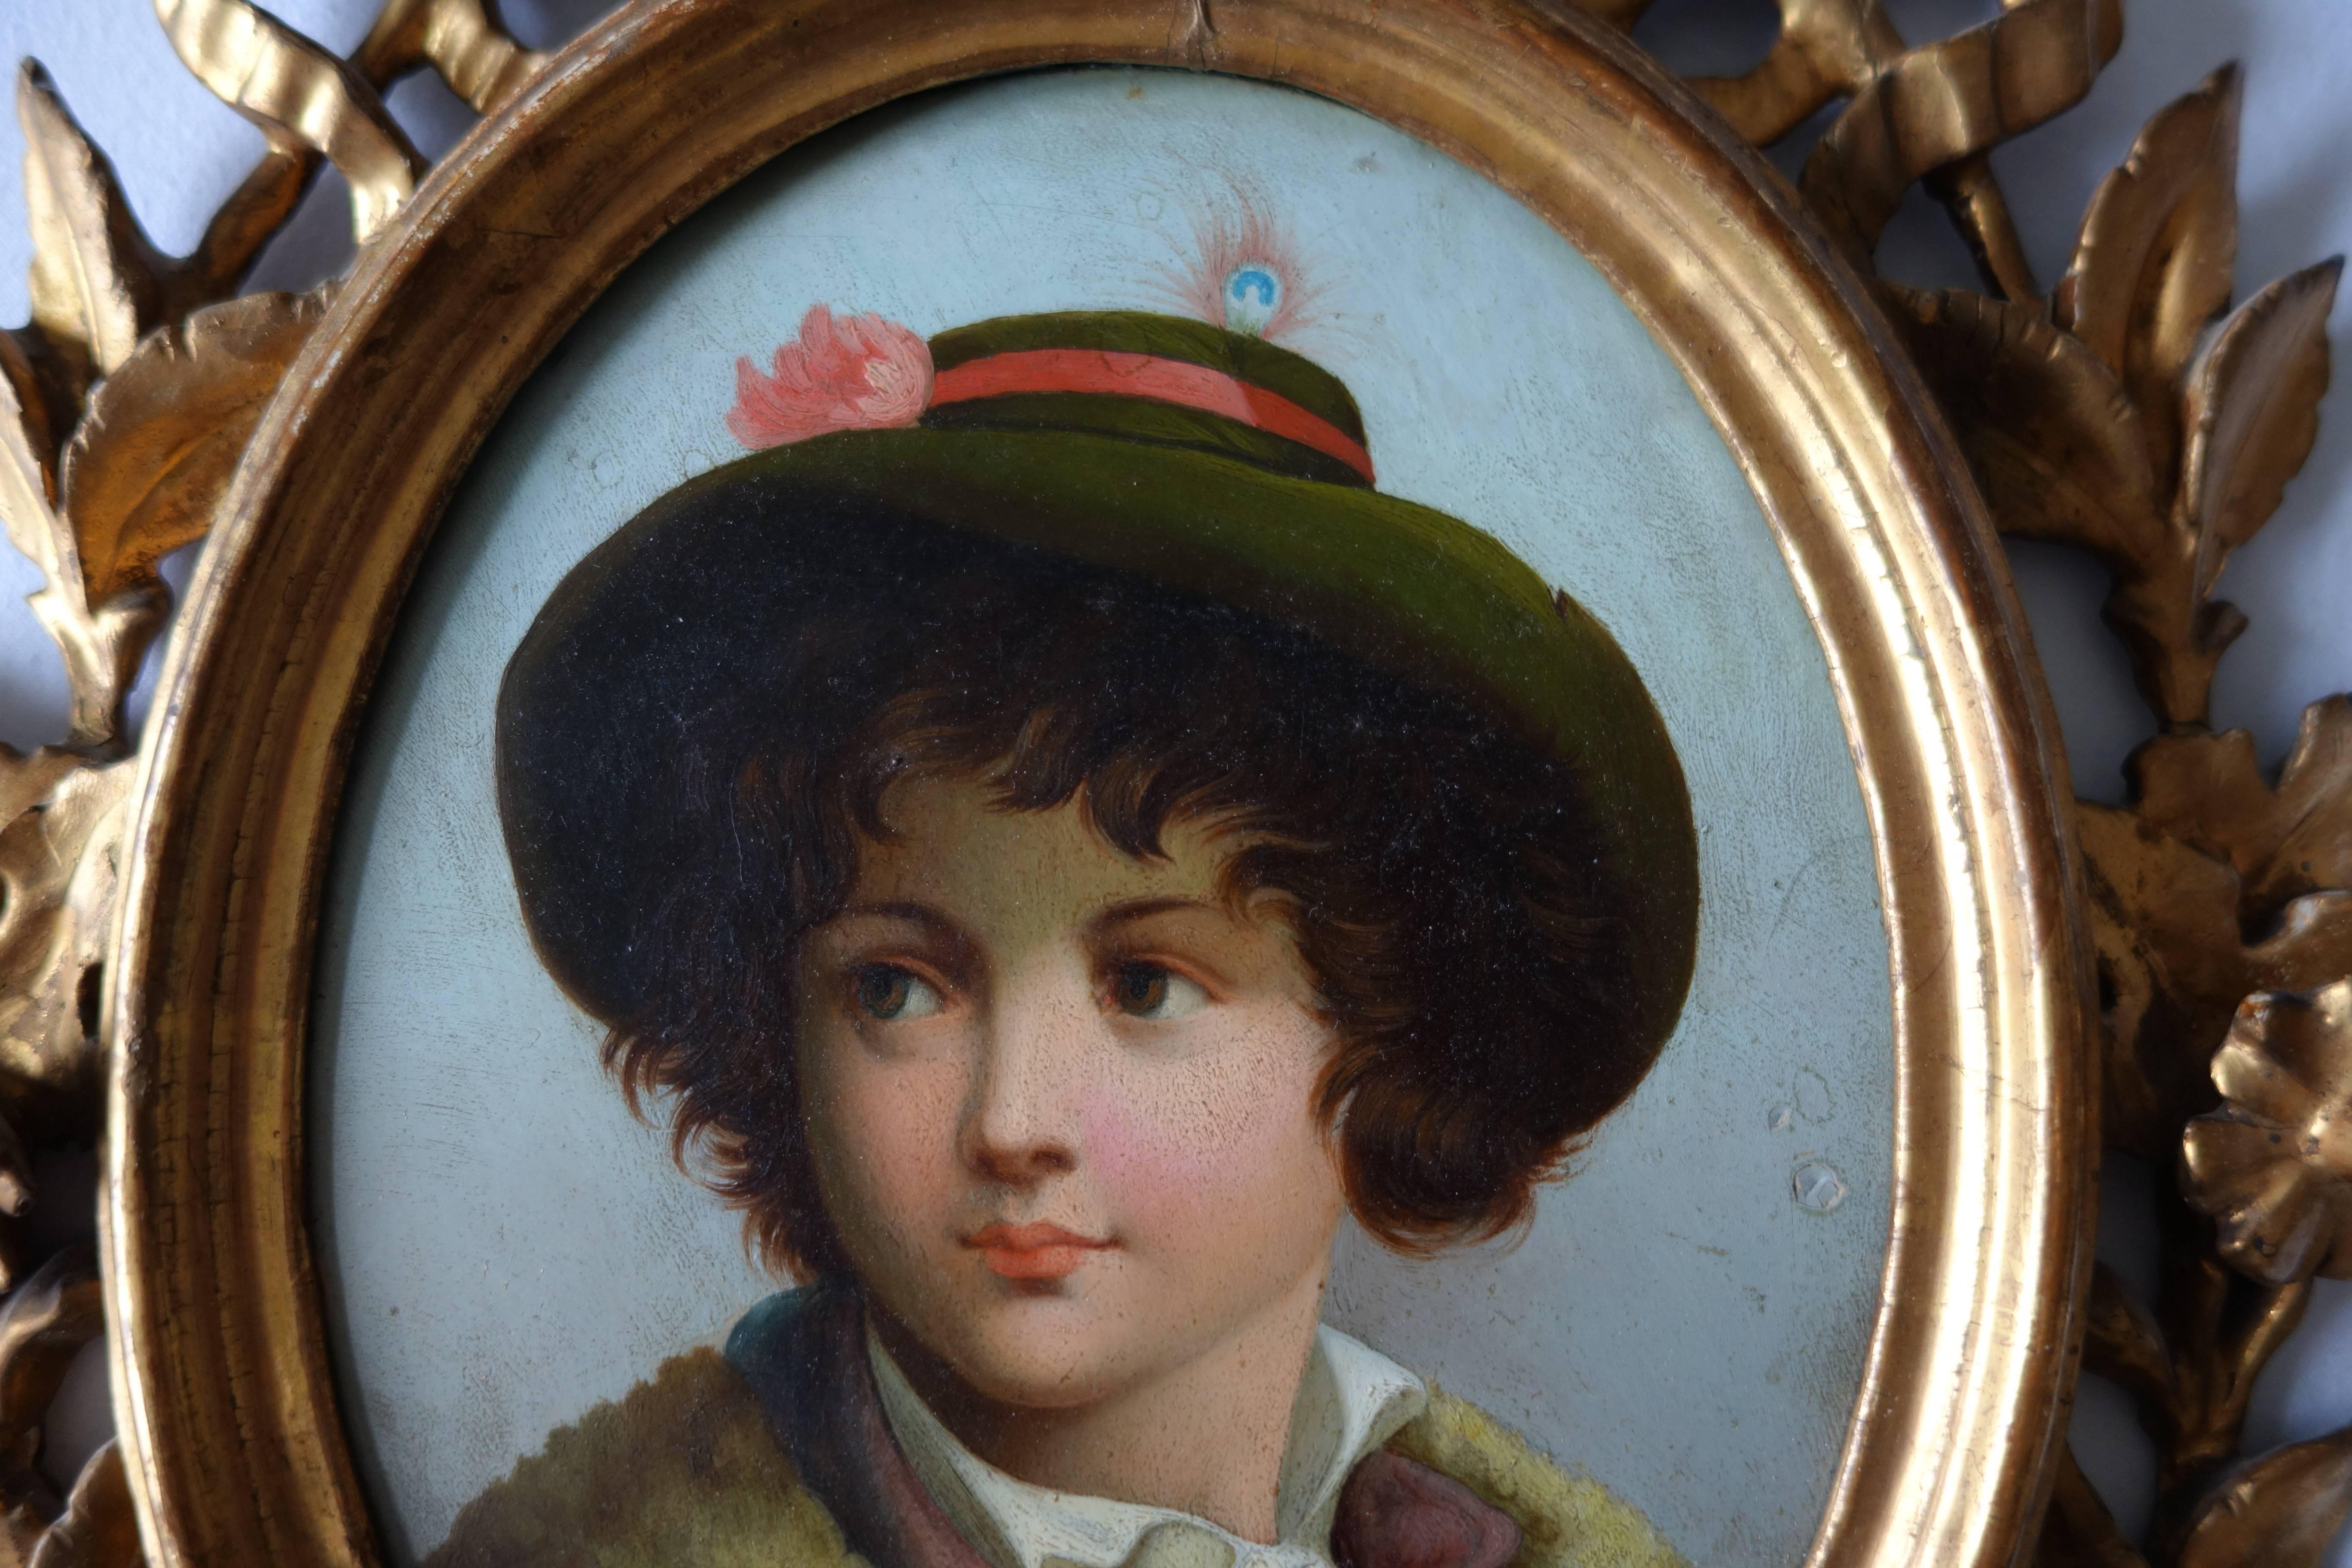 English 19th Century, Oval Portrait of a Boy with Hat, Signed L.E. Gaches Larey